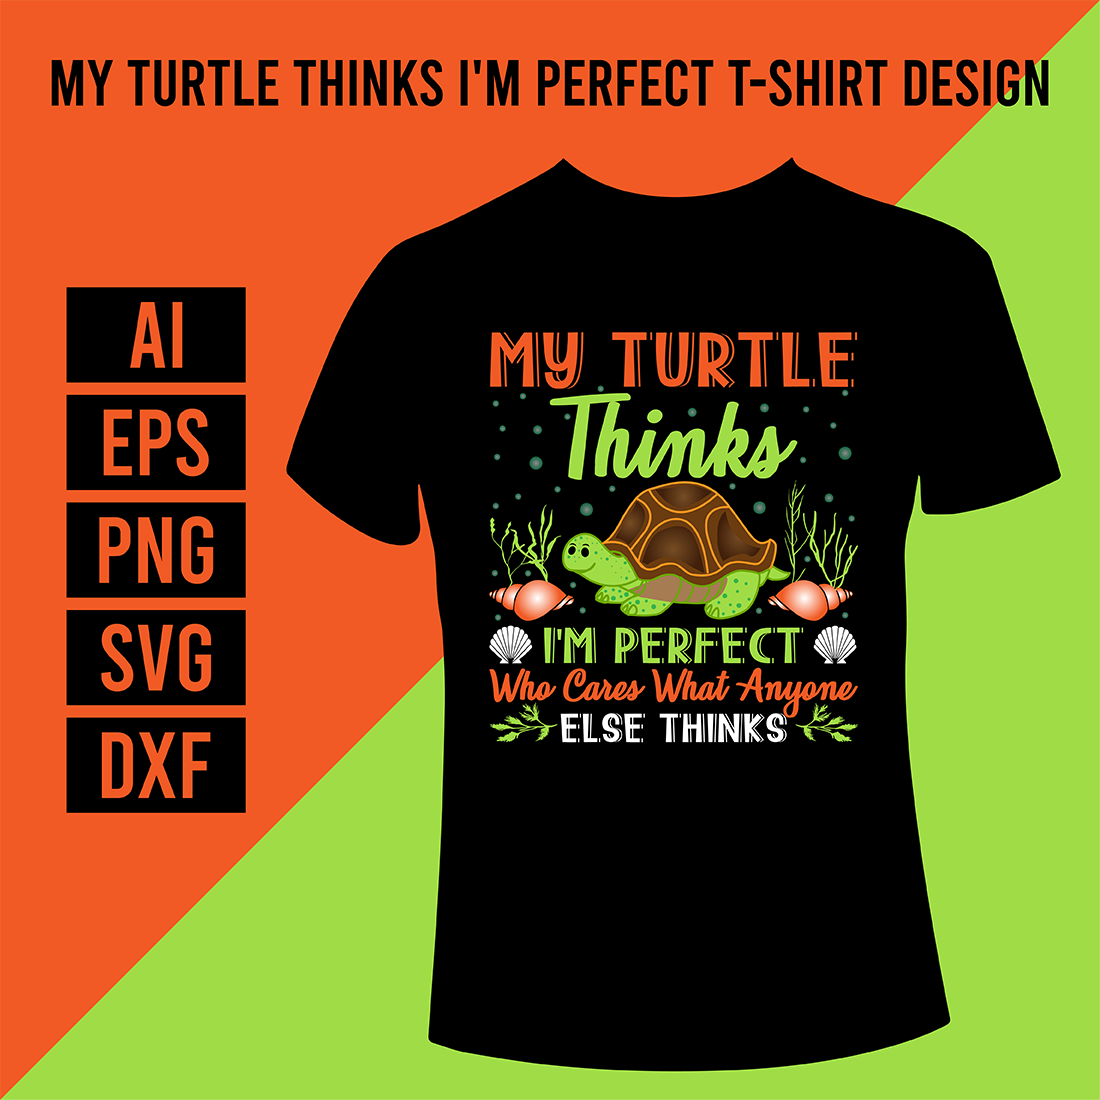 My Turtle Thinks I\'m Perfect T-Shirt Design cover image.